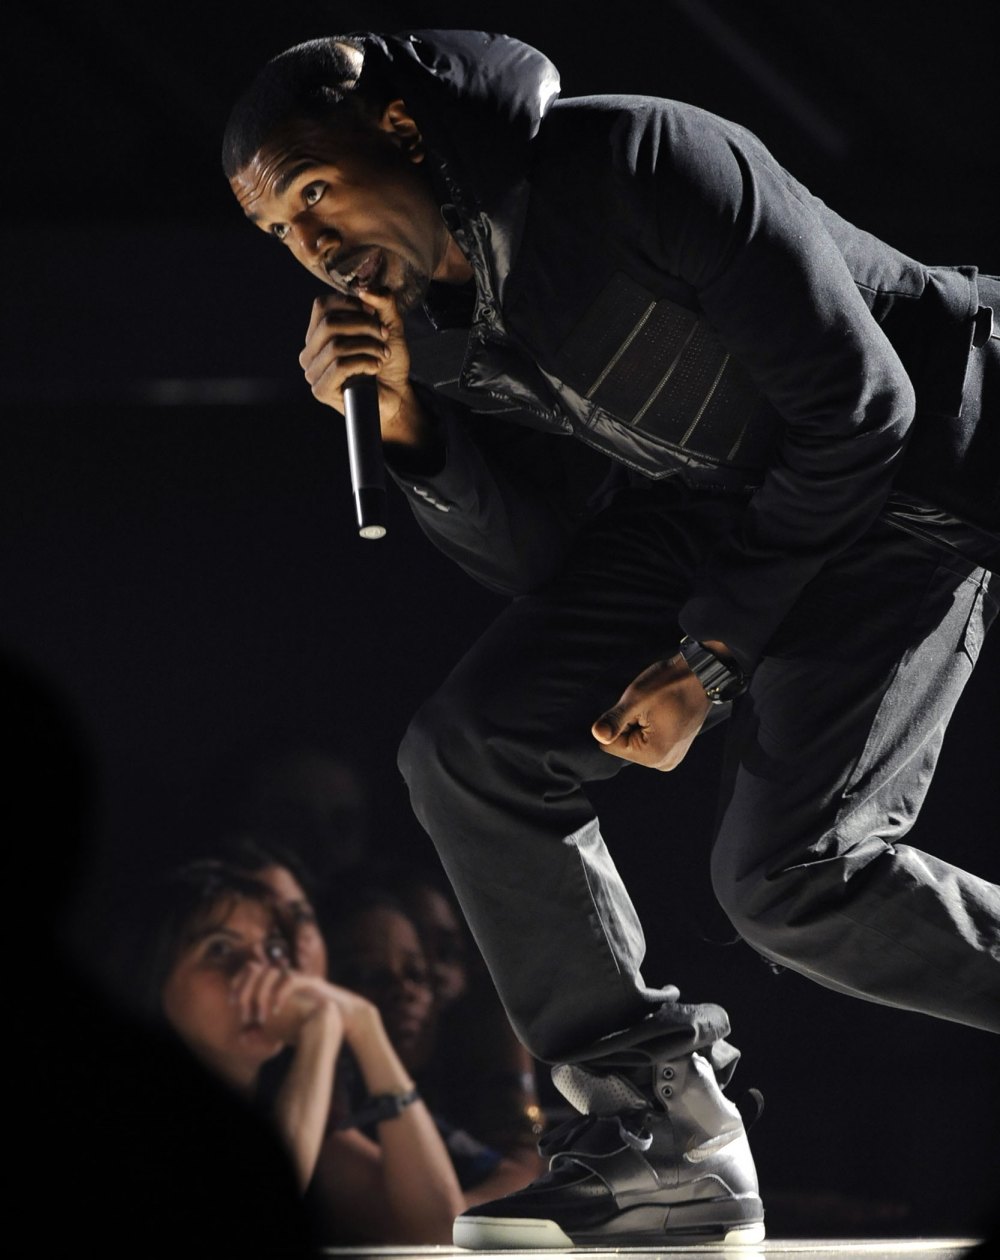 Kanye West’s Nike Air Yeezy 1 Prototype Sells for $1.8 Million: Details